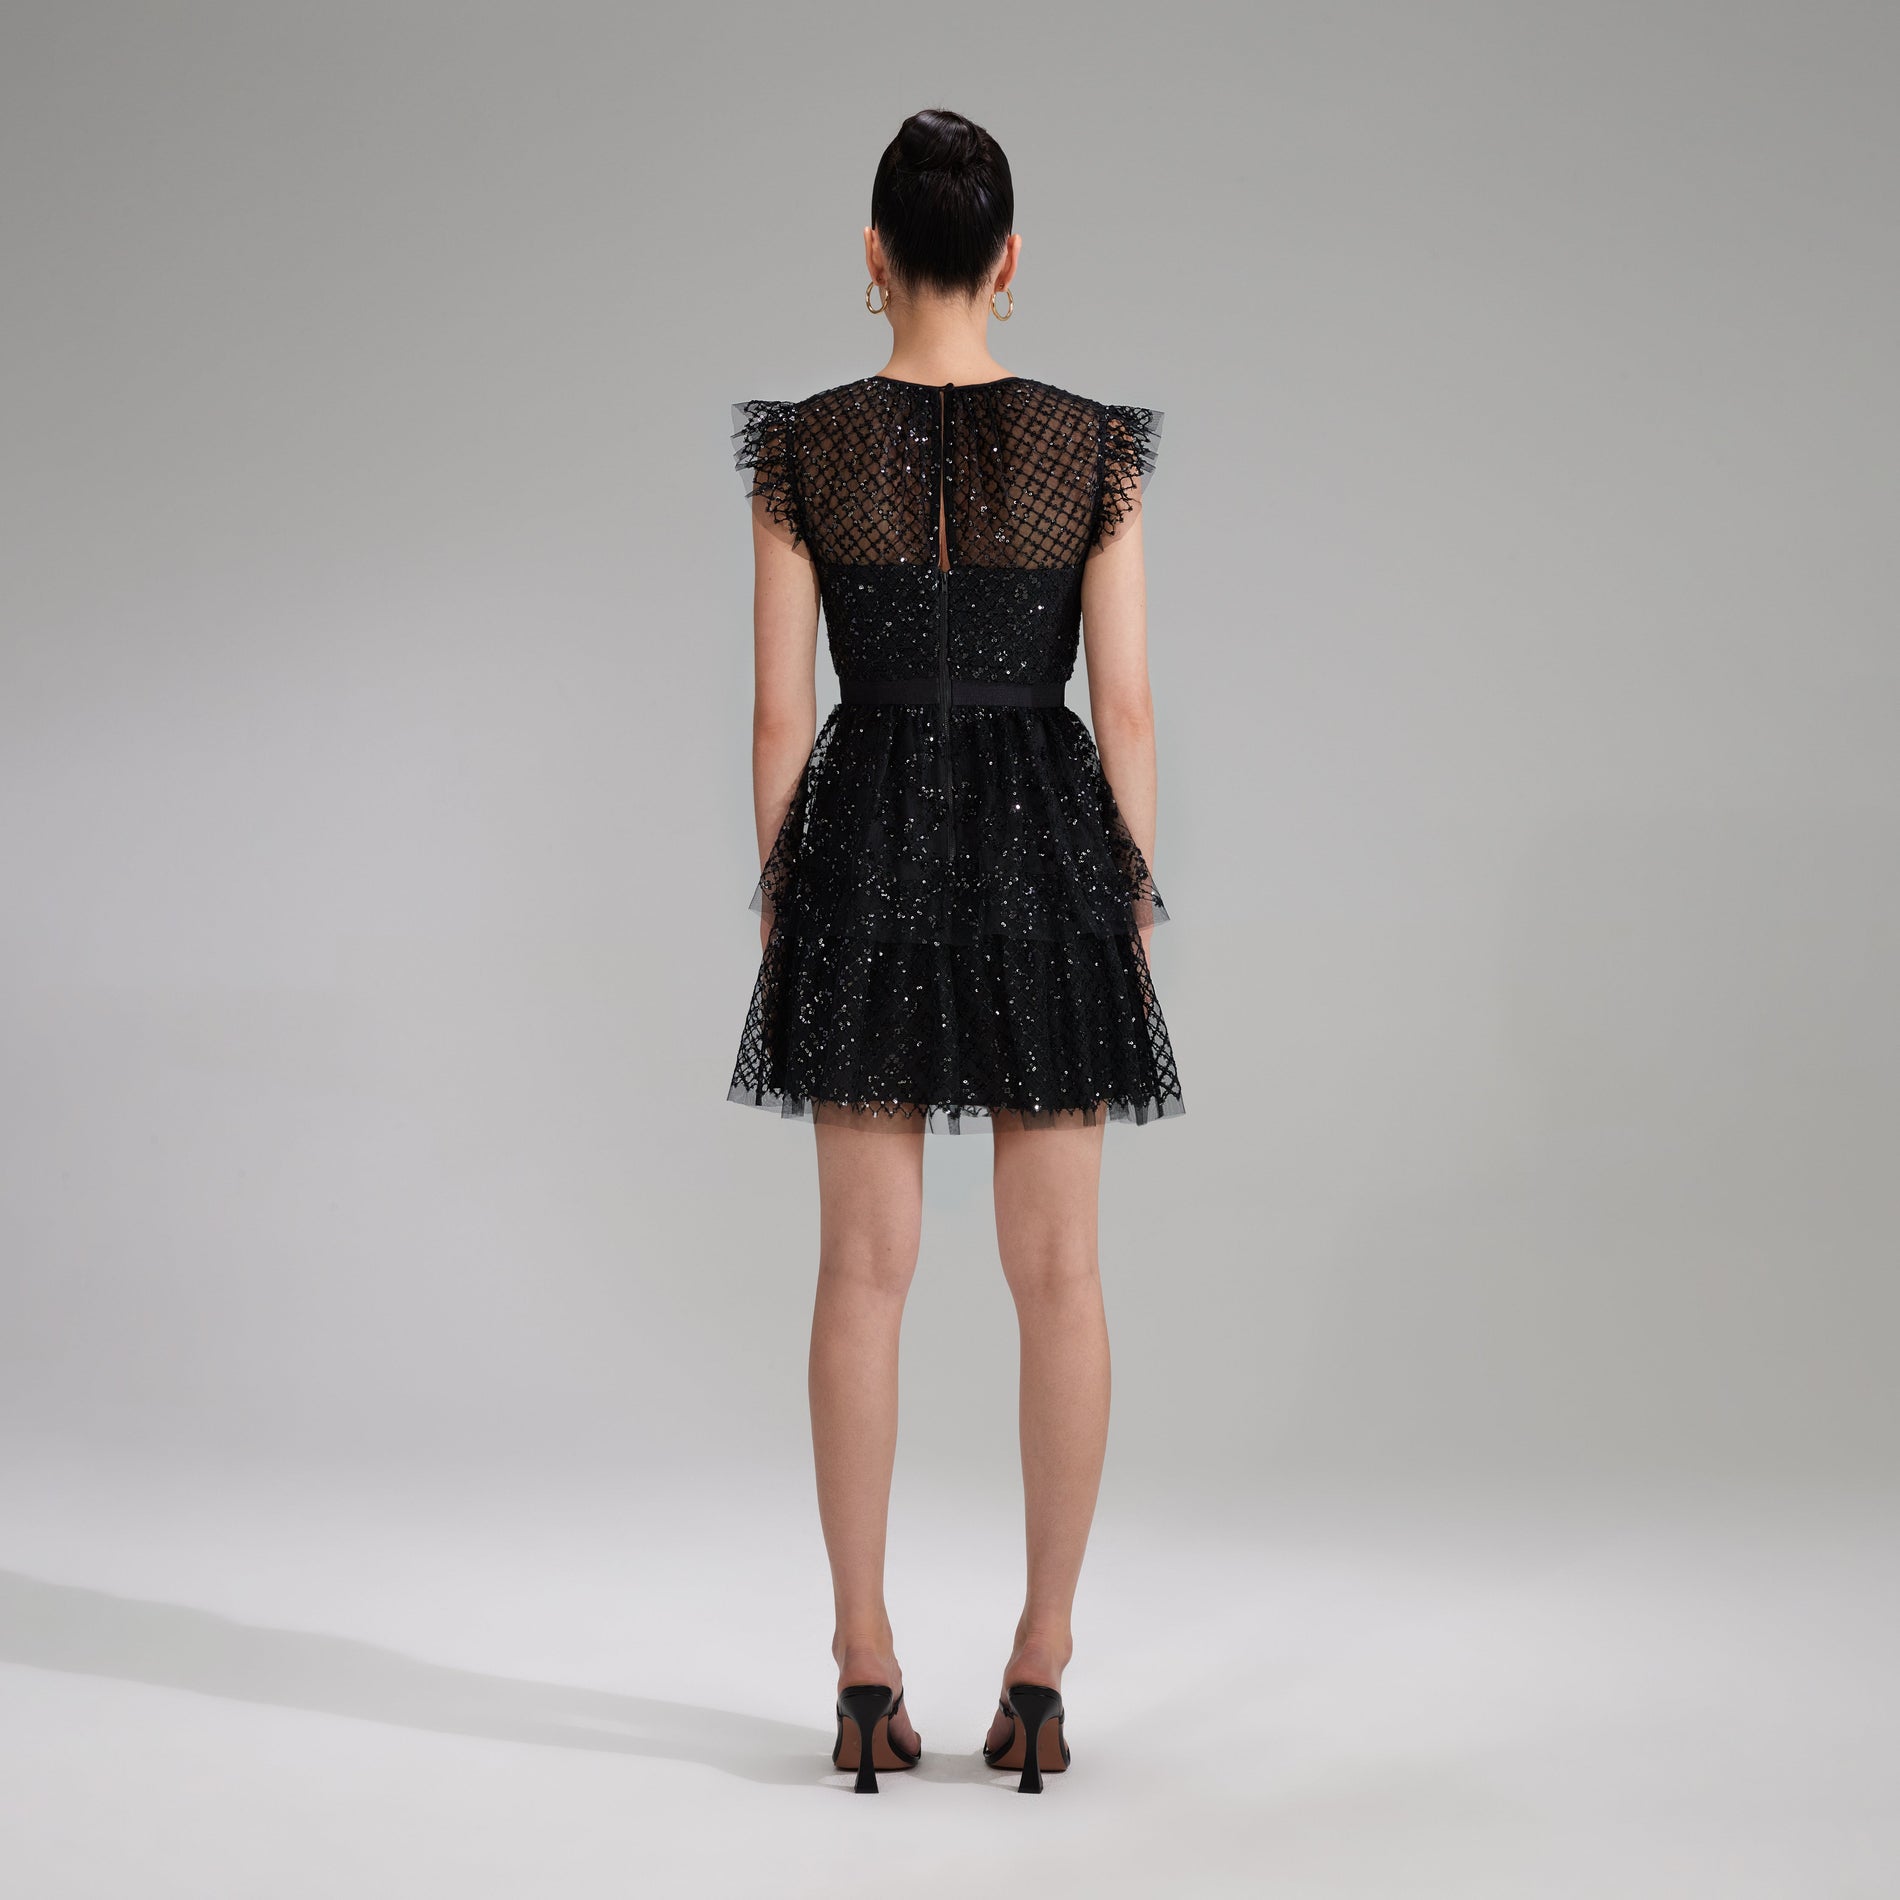 A woman wearing the Black Grid Sequin Tiered Mini Dress